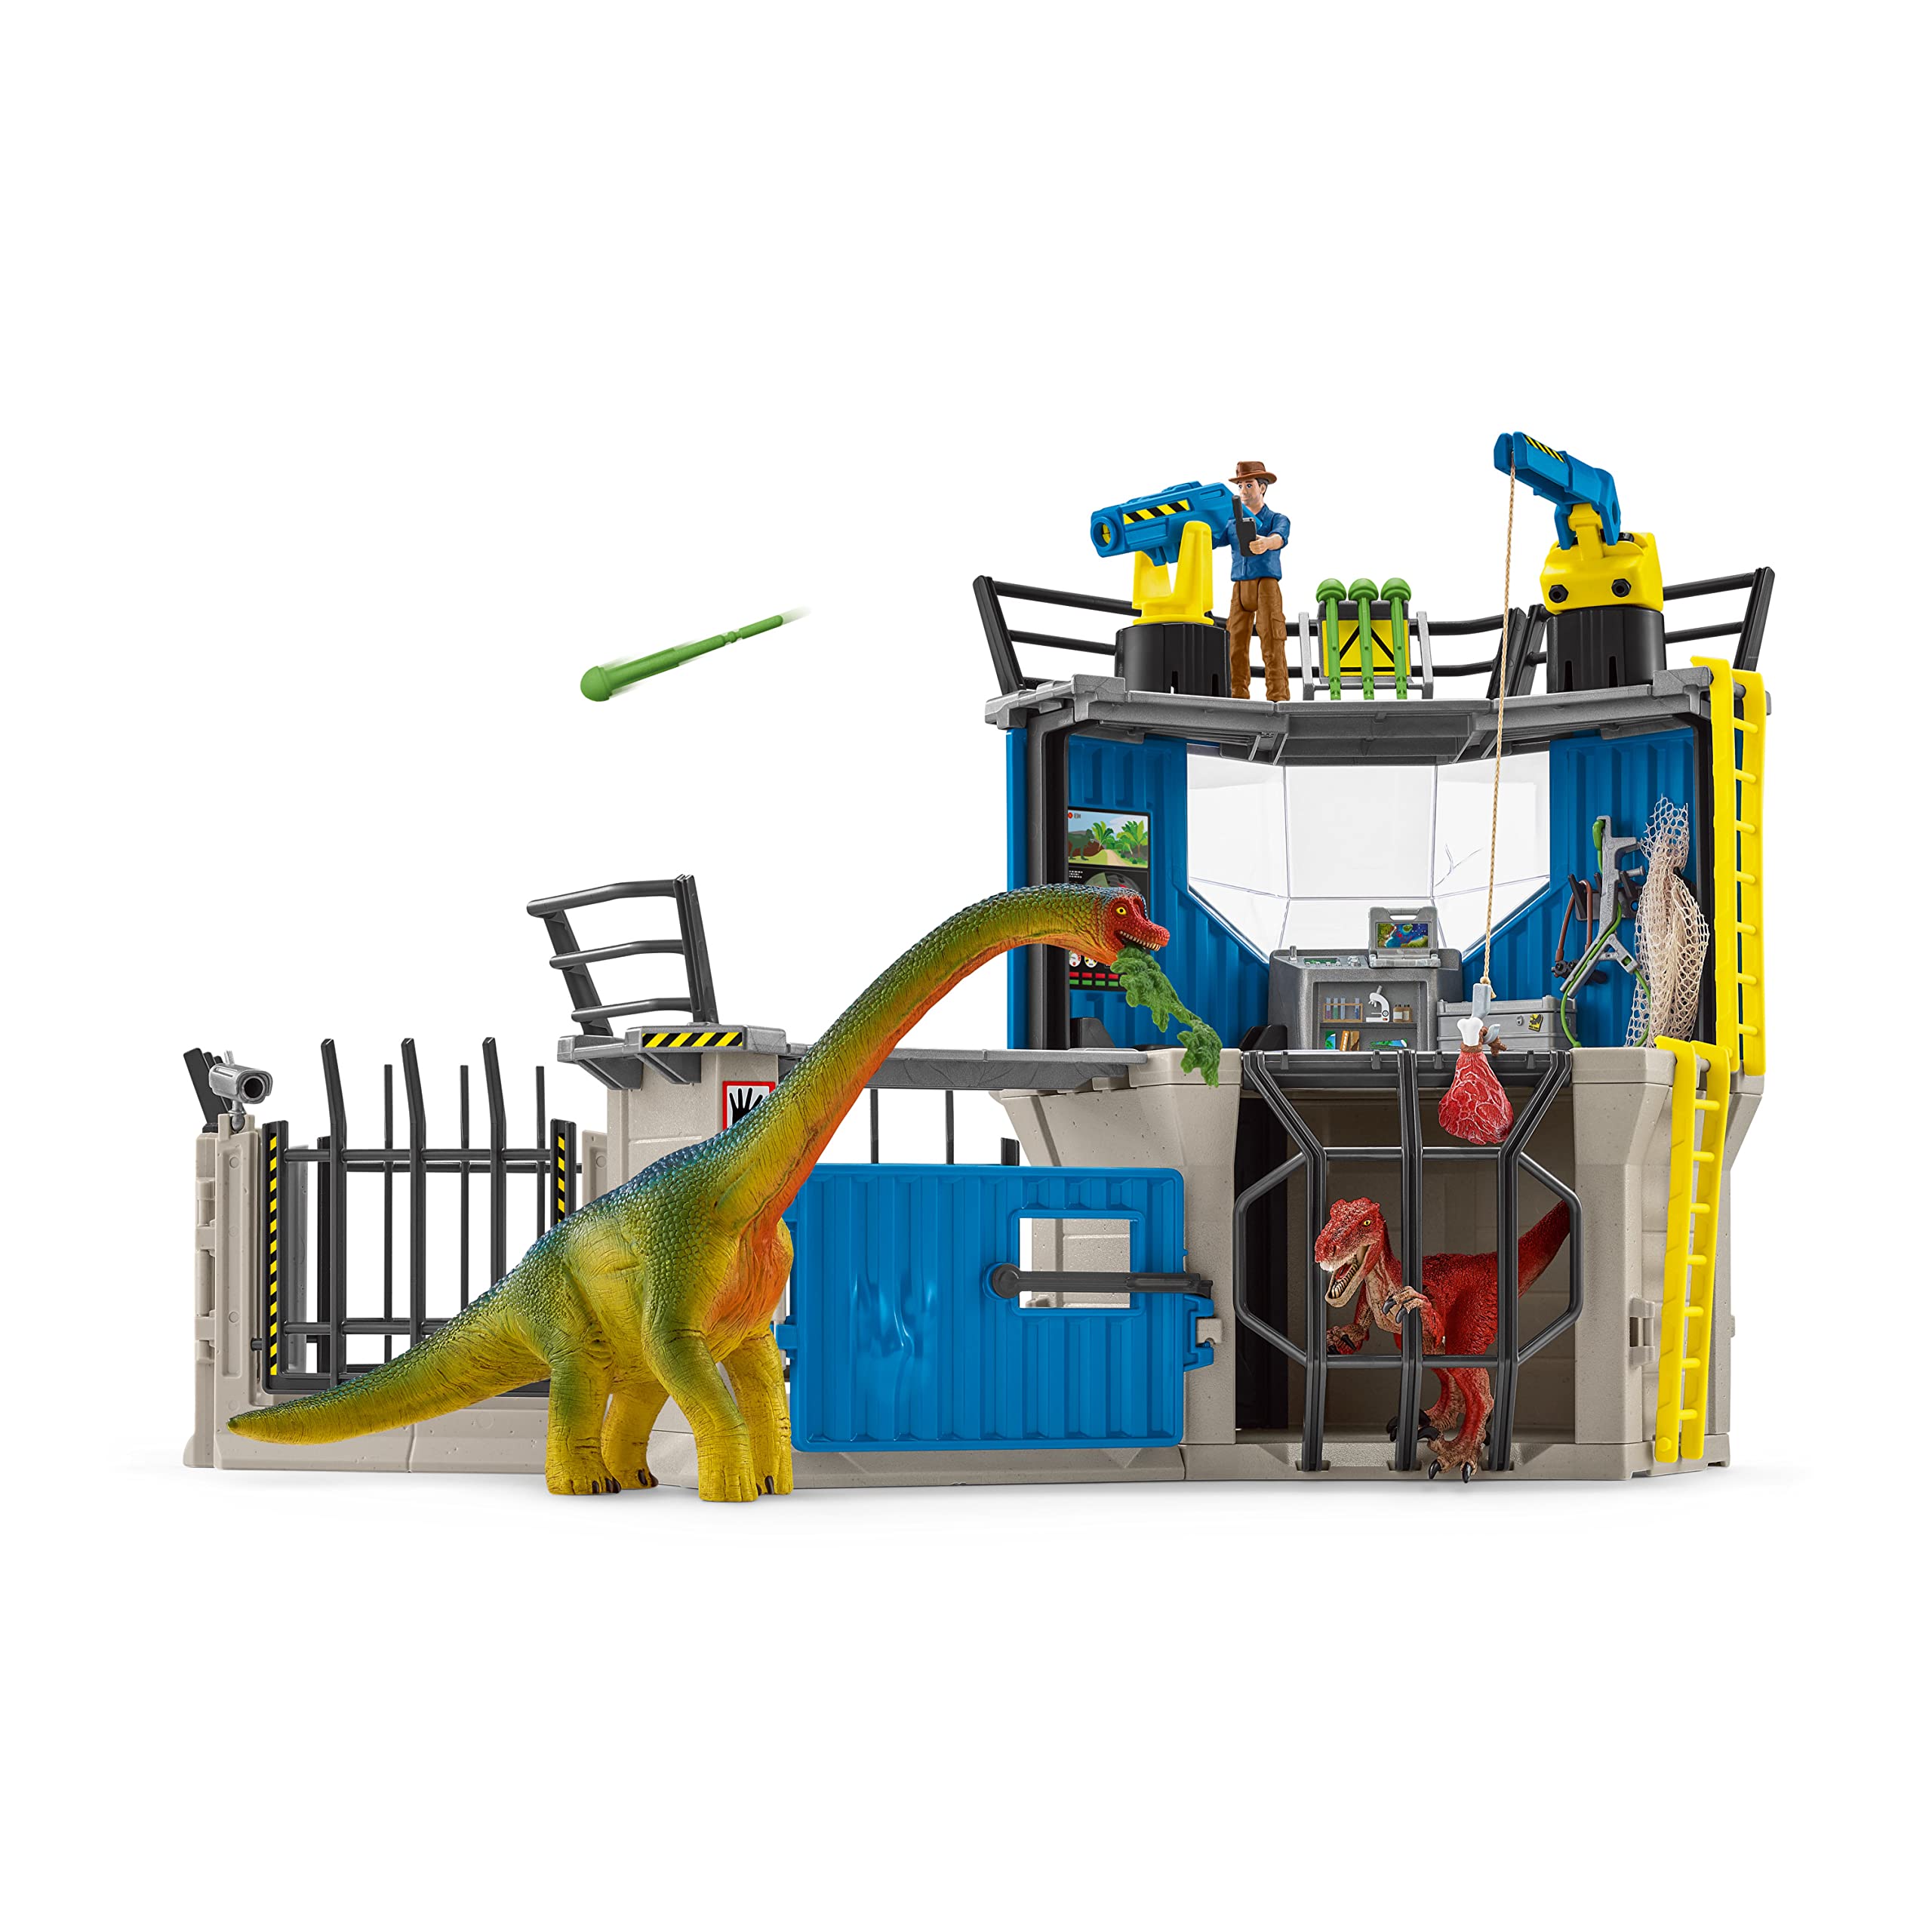 Schleich Dinosaur Toys Science Playset - 33-Piece Set Research Station with Brachiosaurus, Velociraptor, Men Scientist Action Figures, and Dart Cannon, Kids Figurines for Ages 4 and Above